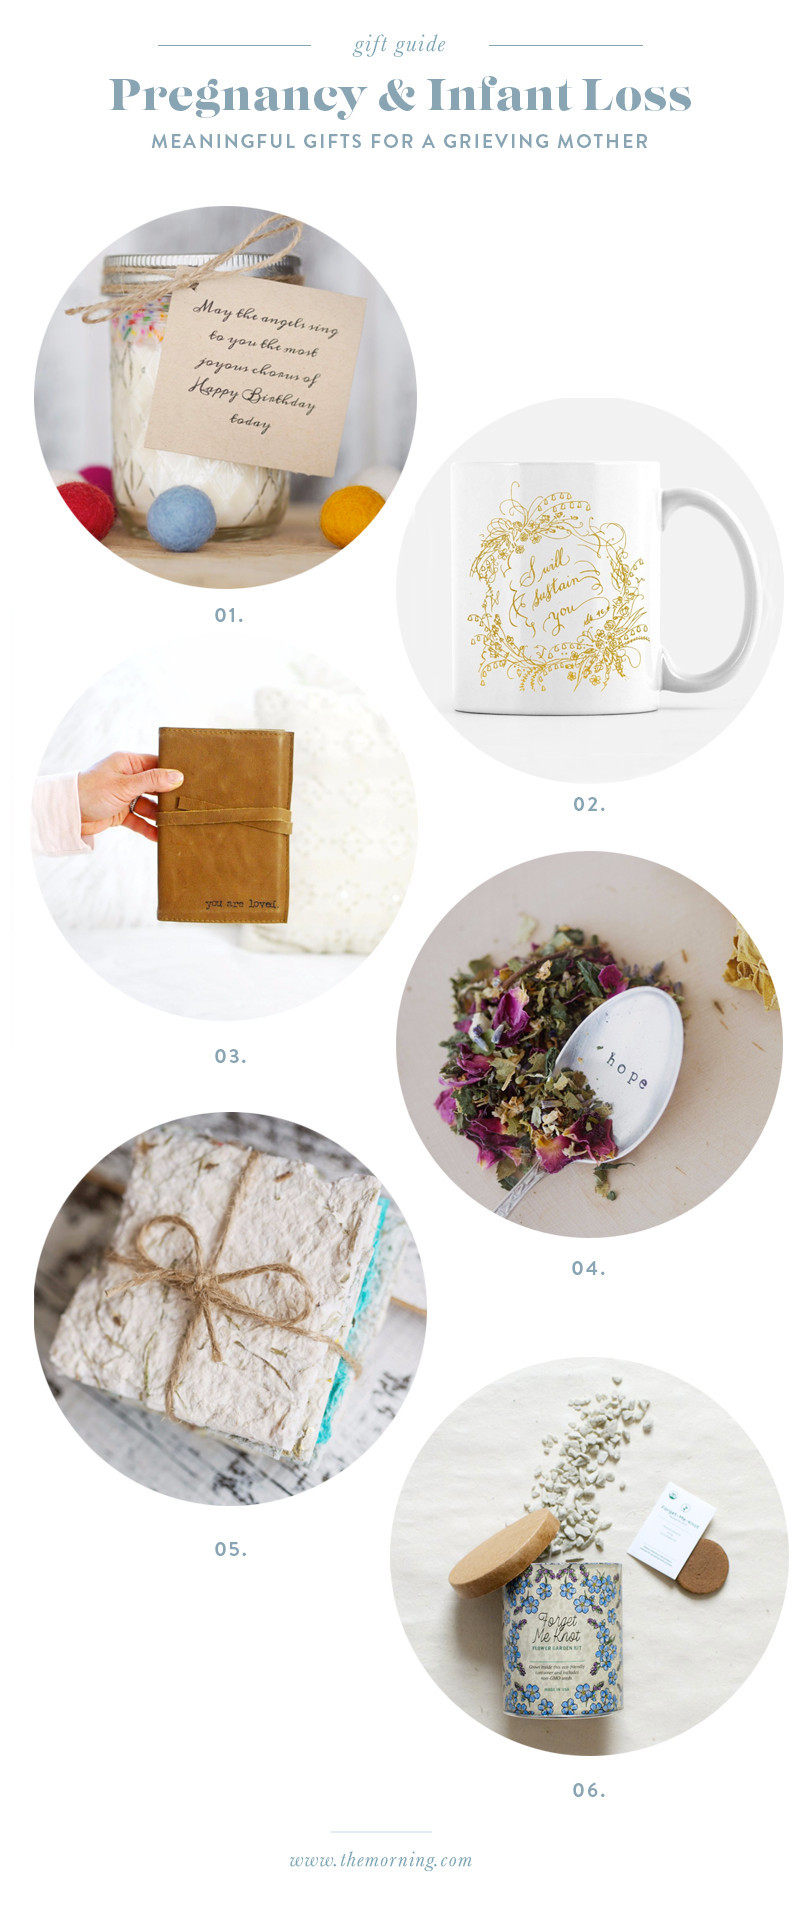 Gift Ideas For Grieving Mothers
 The 30 Best Ideas for Gift Ideas for A Grieving Mother